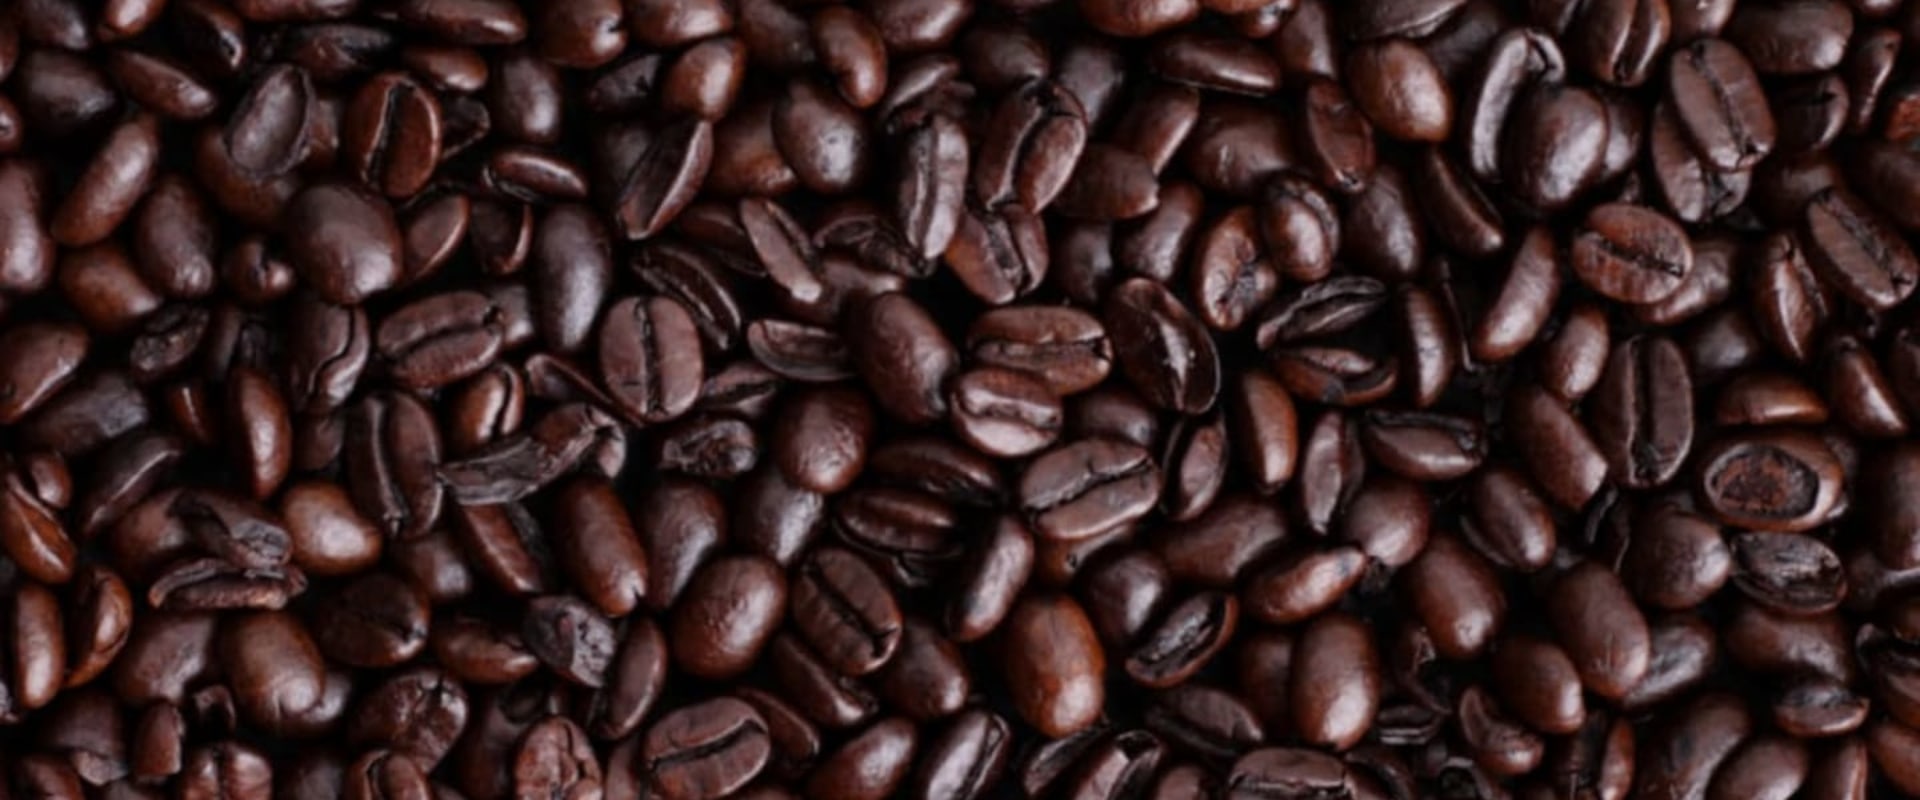 The Fascinating History of Coffee: From Ethiopia to the World